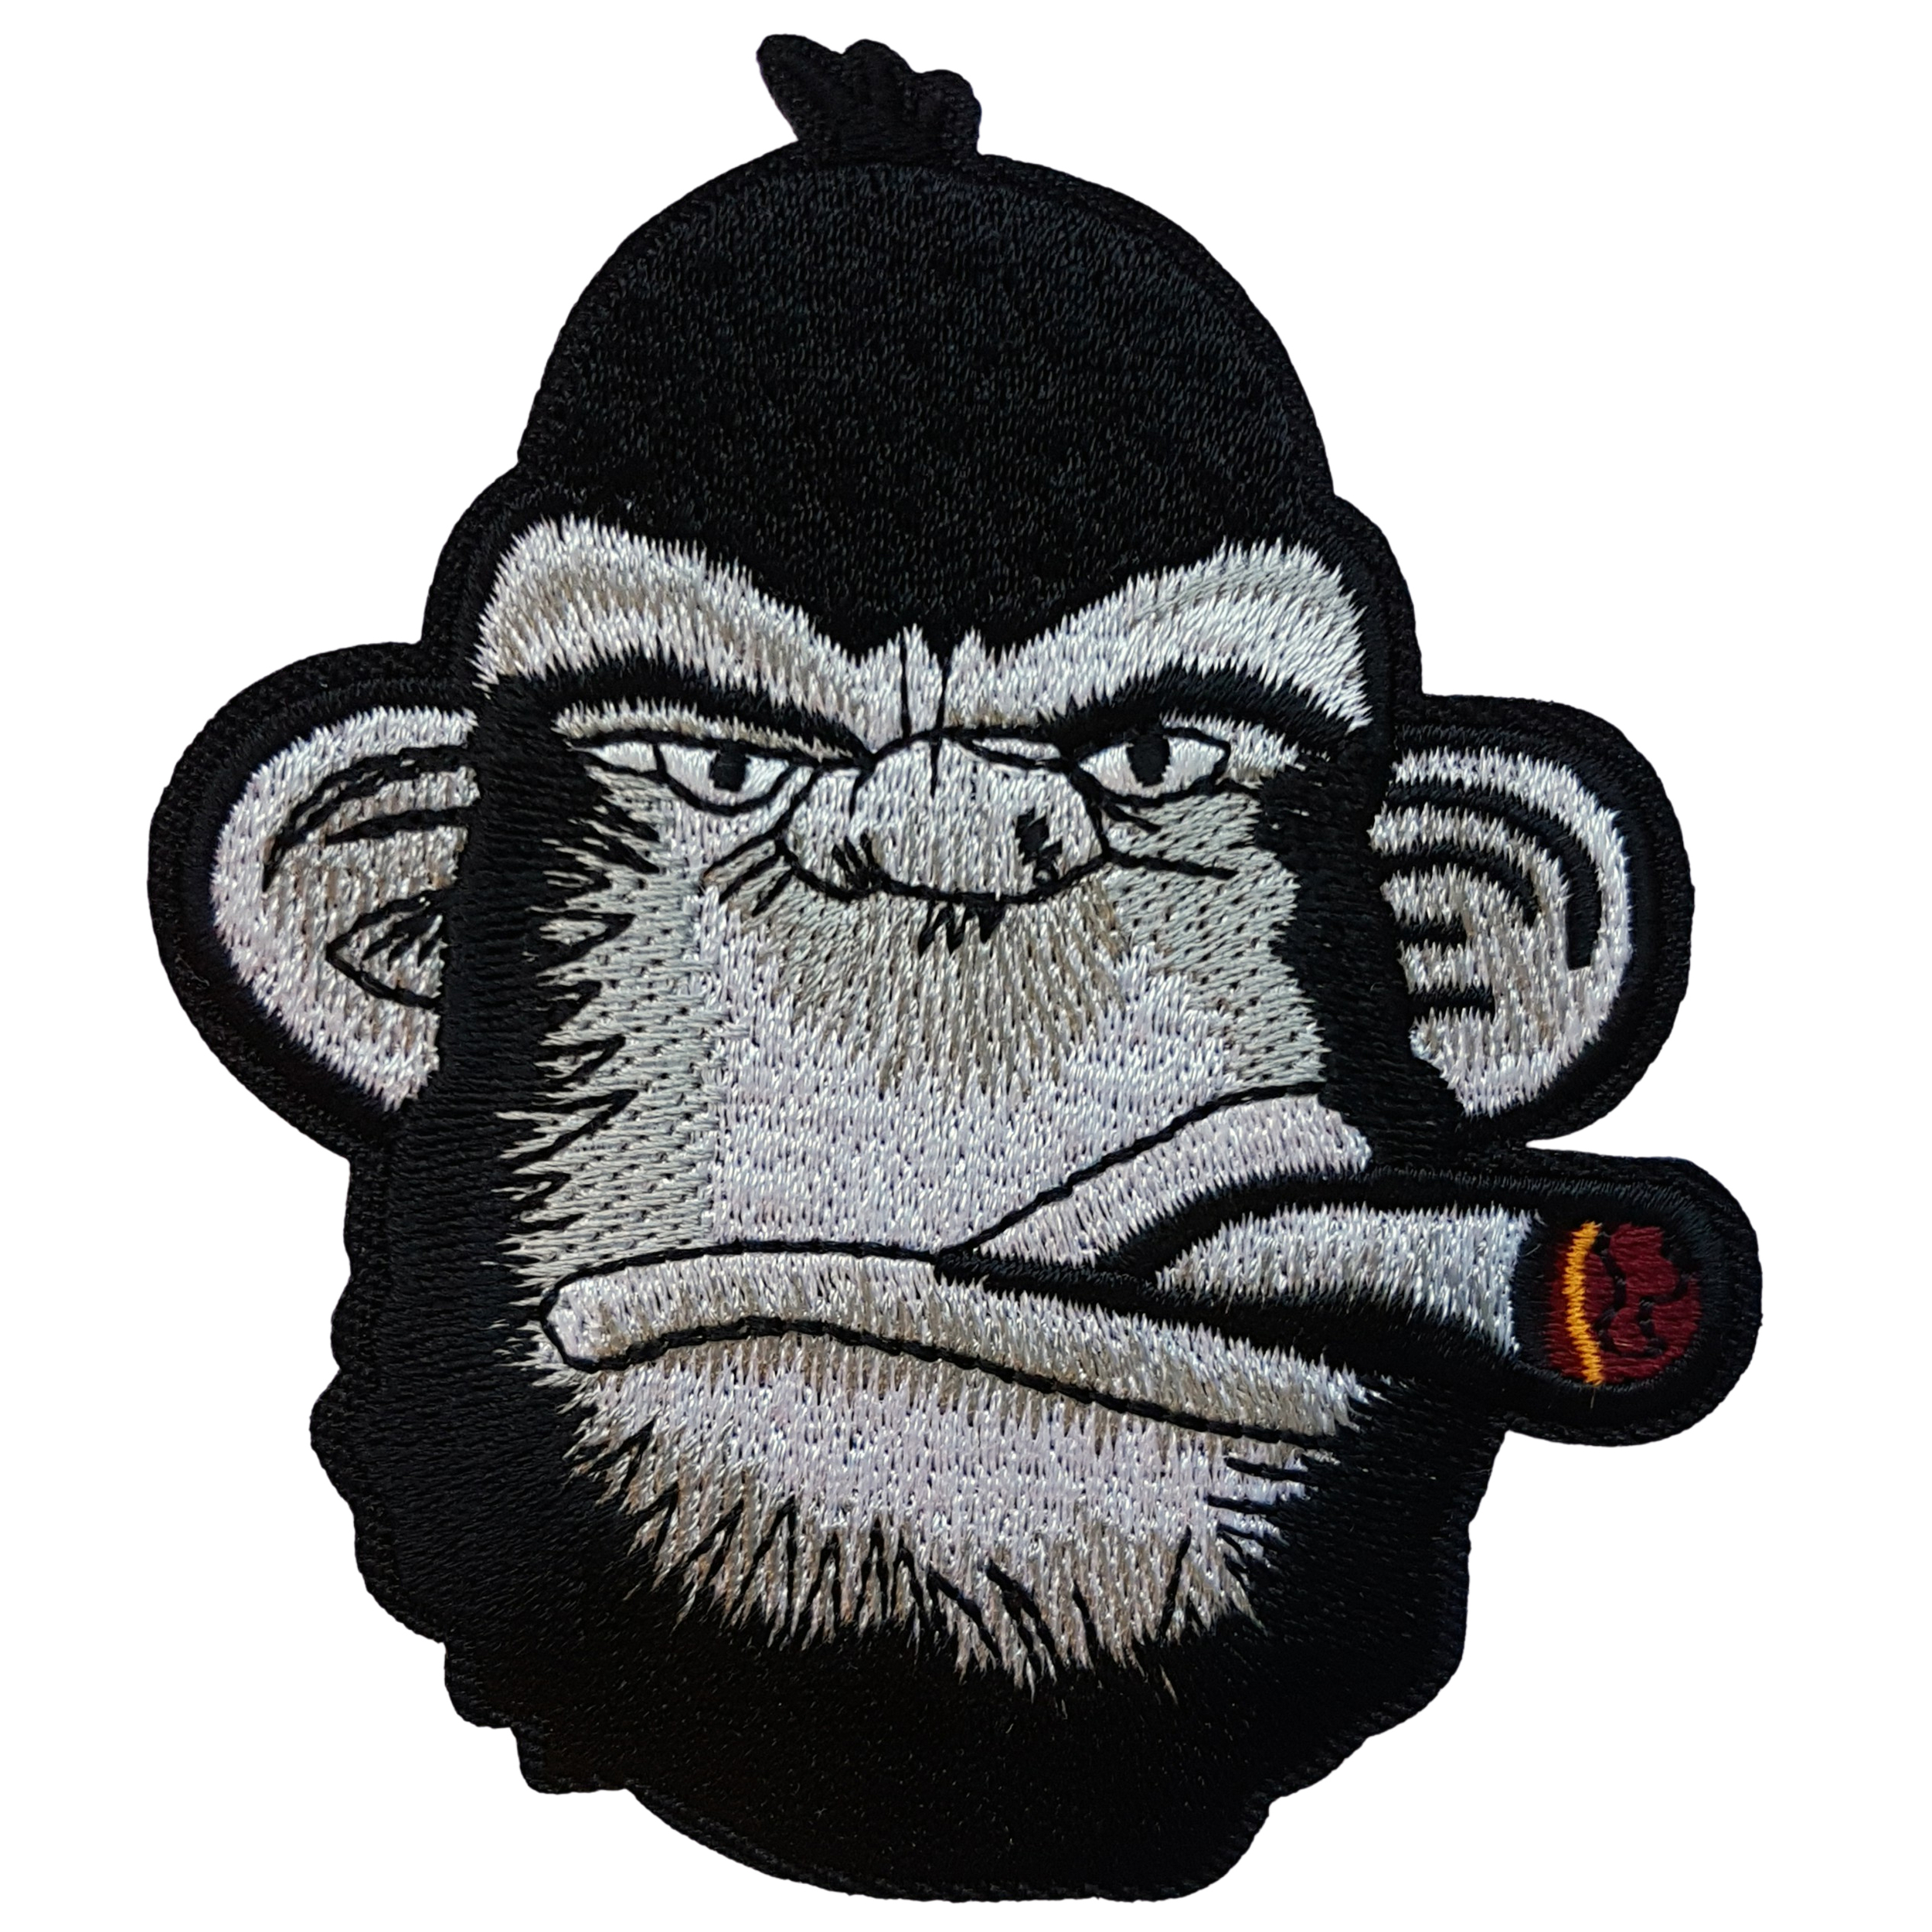 Patch Thermocollant Gorille Cigare